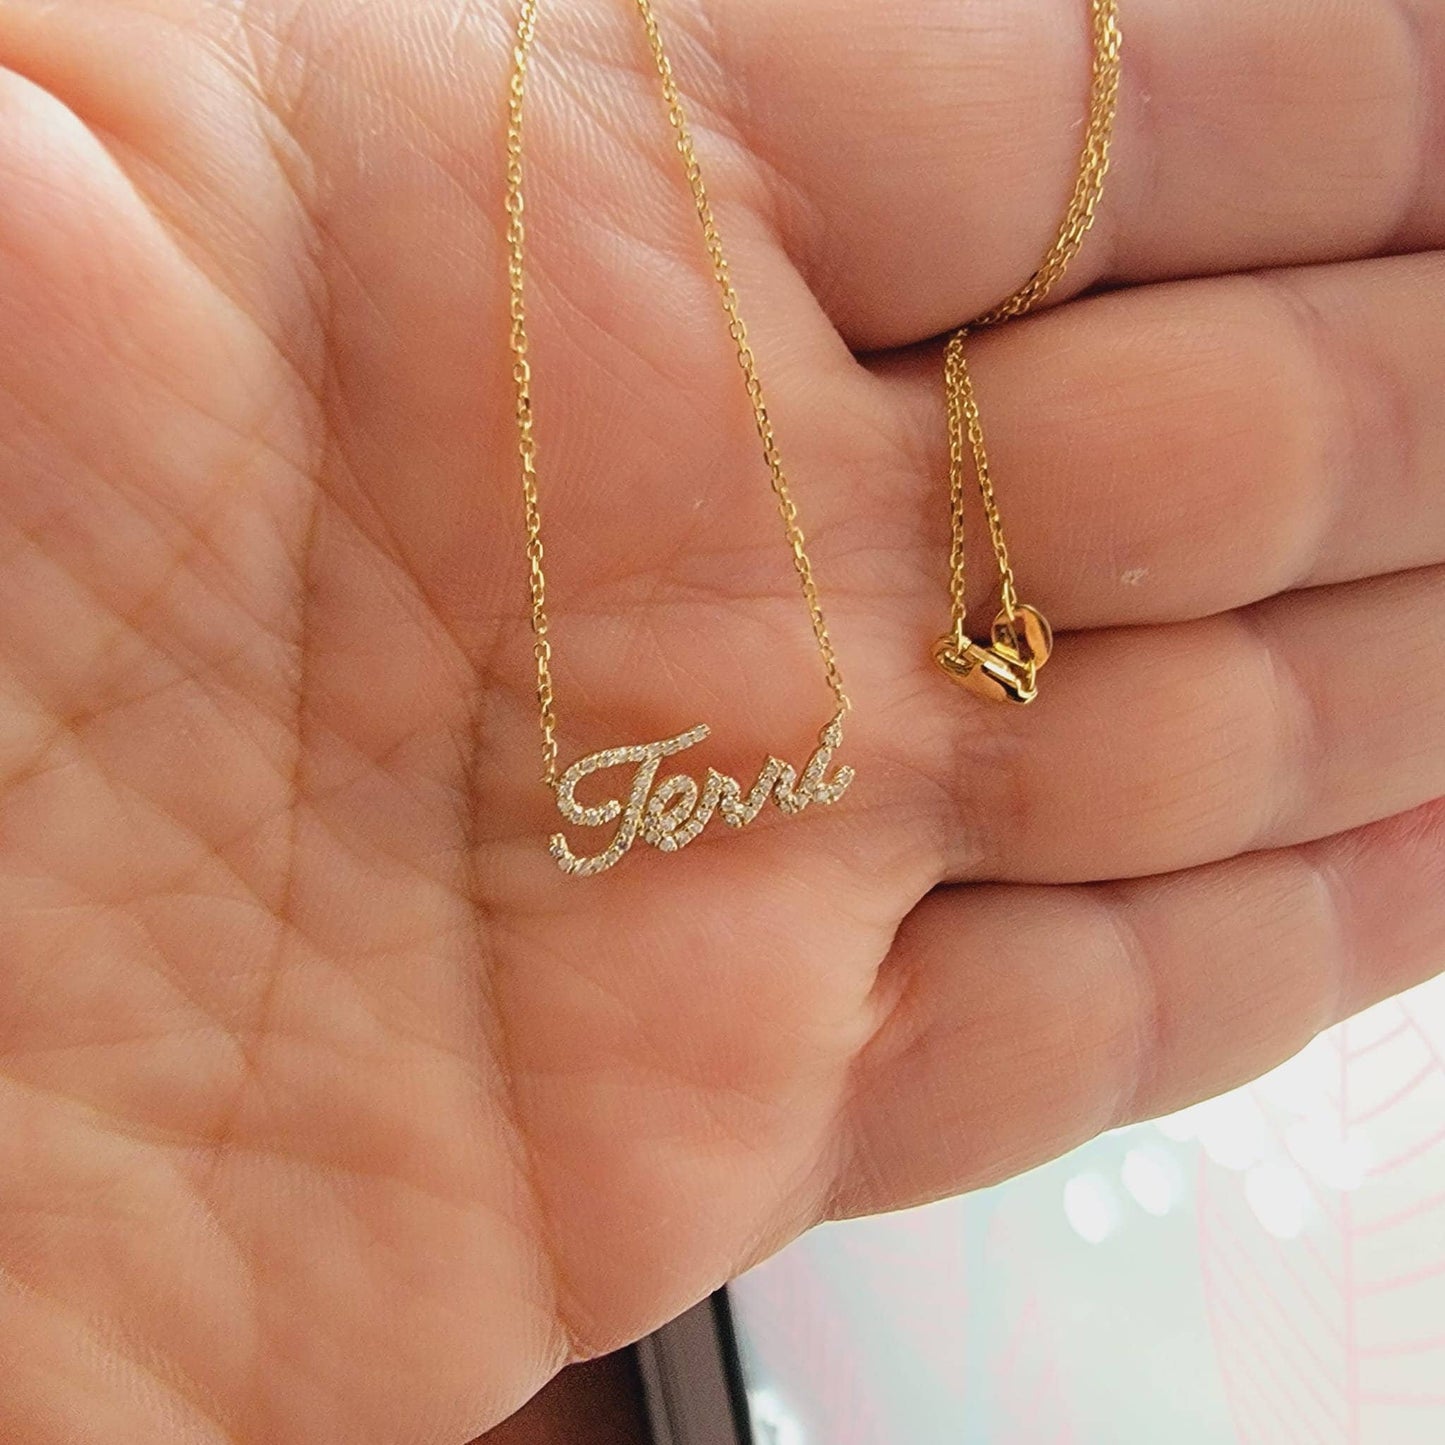 Diamond Name Necklace, 14k Personalized Dainty Script Name Necklace, Personalized Diamond Letter Necklace, Lowercase Name Necklace, Gift